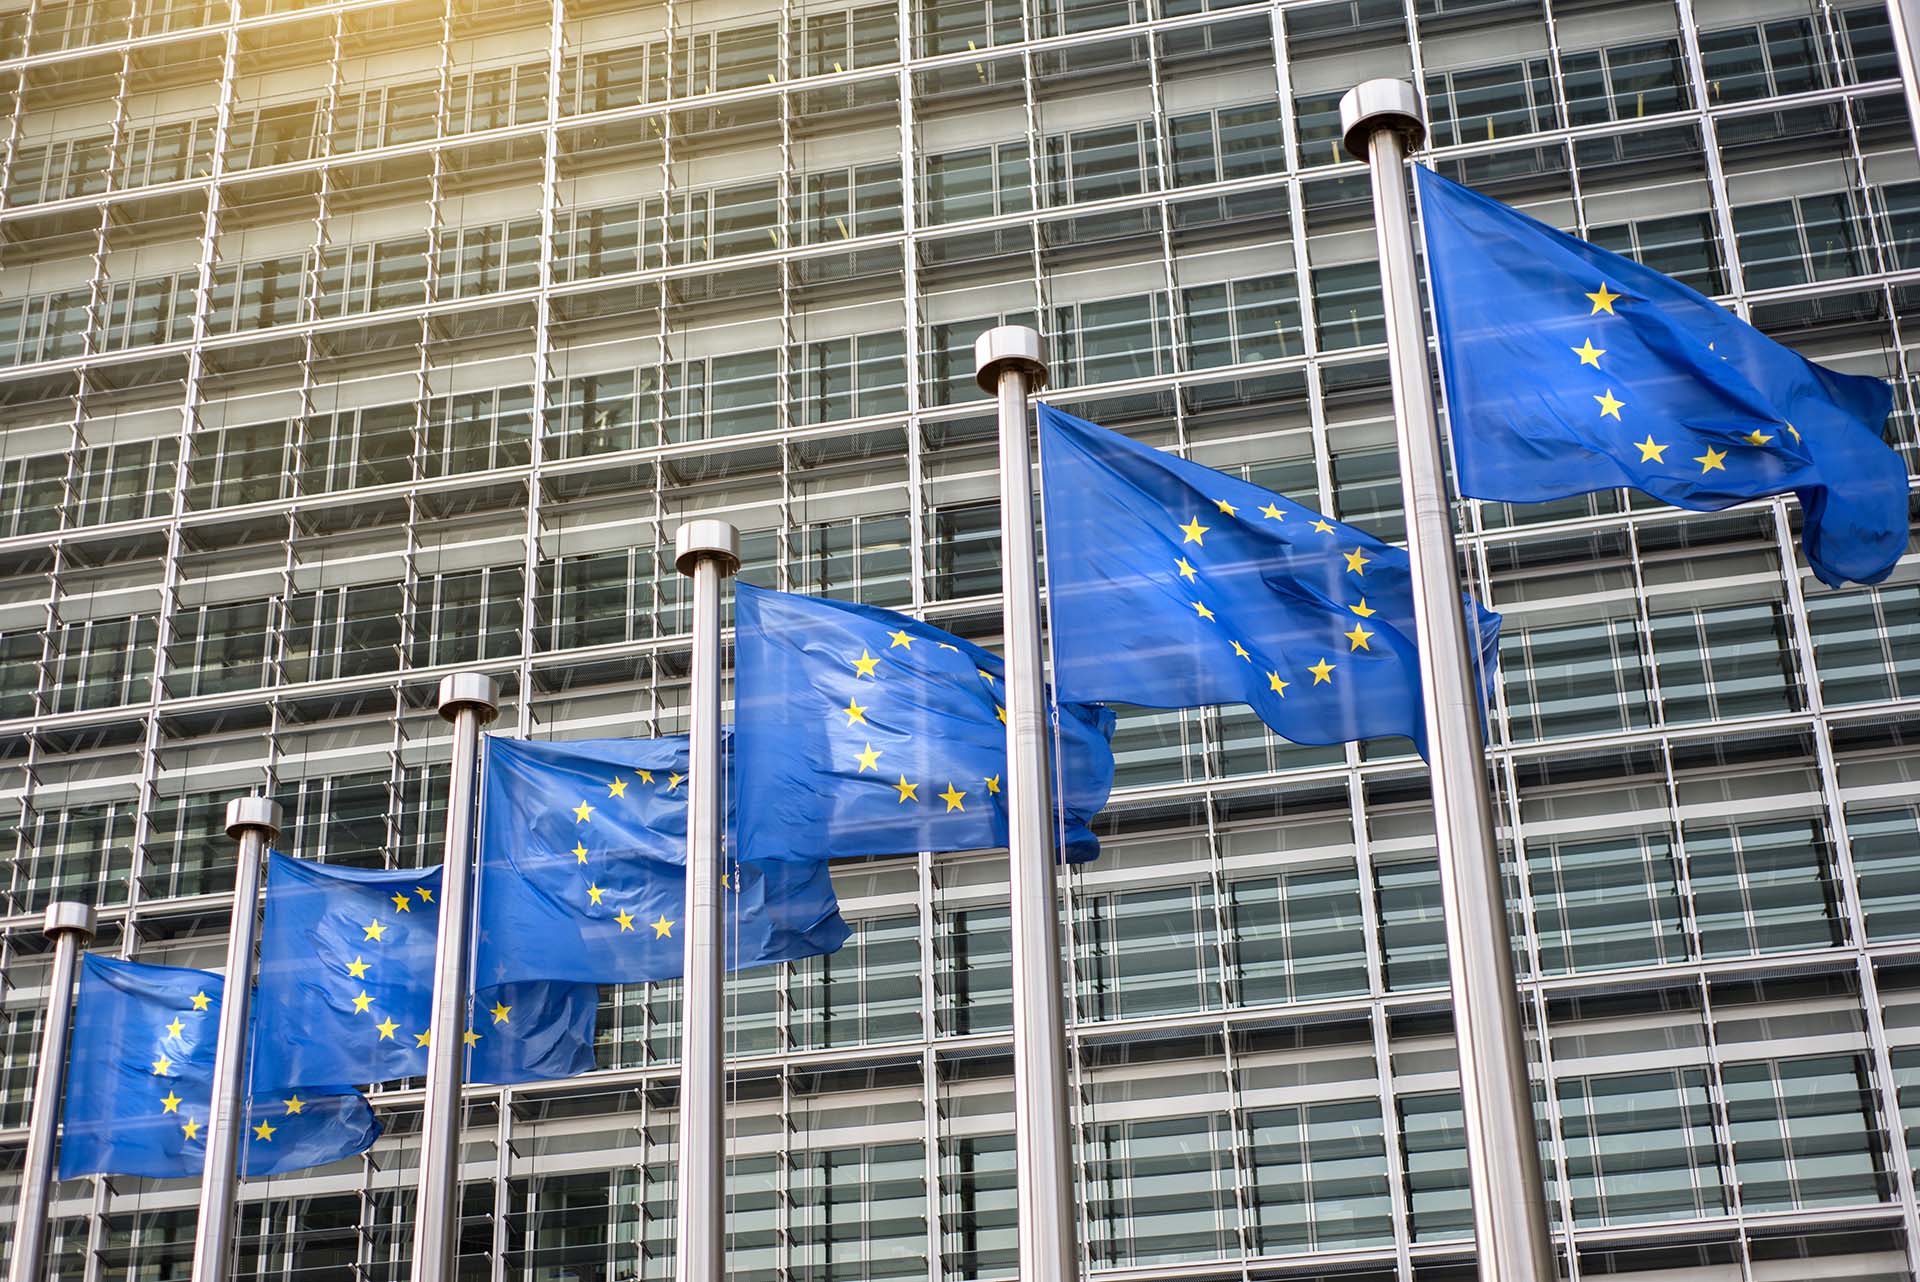 Multiple European Union flags, blue with yellow stars, are displayed on flagpoles in front of a modern, glass building. The sunlight creates a gentle, warm glow in the top-left corner of the image.